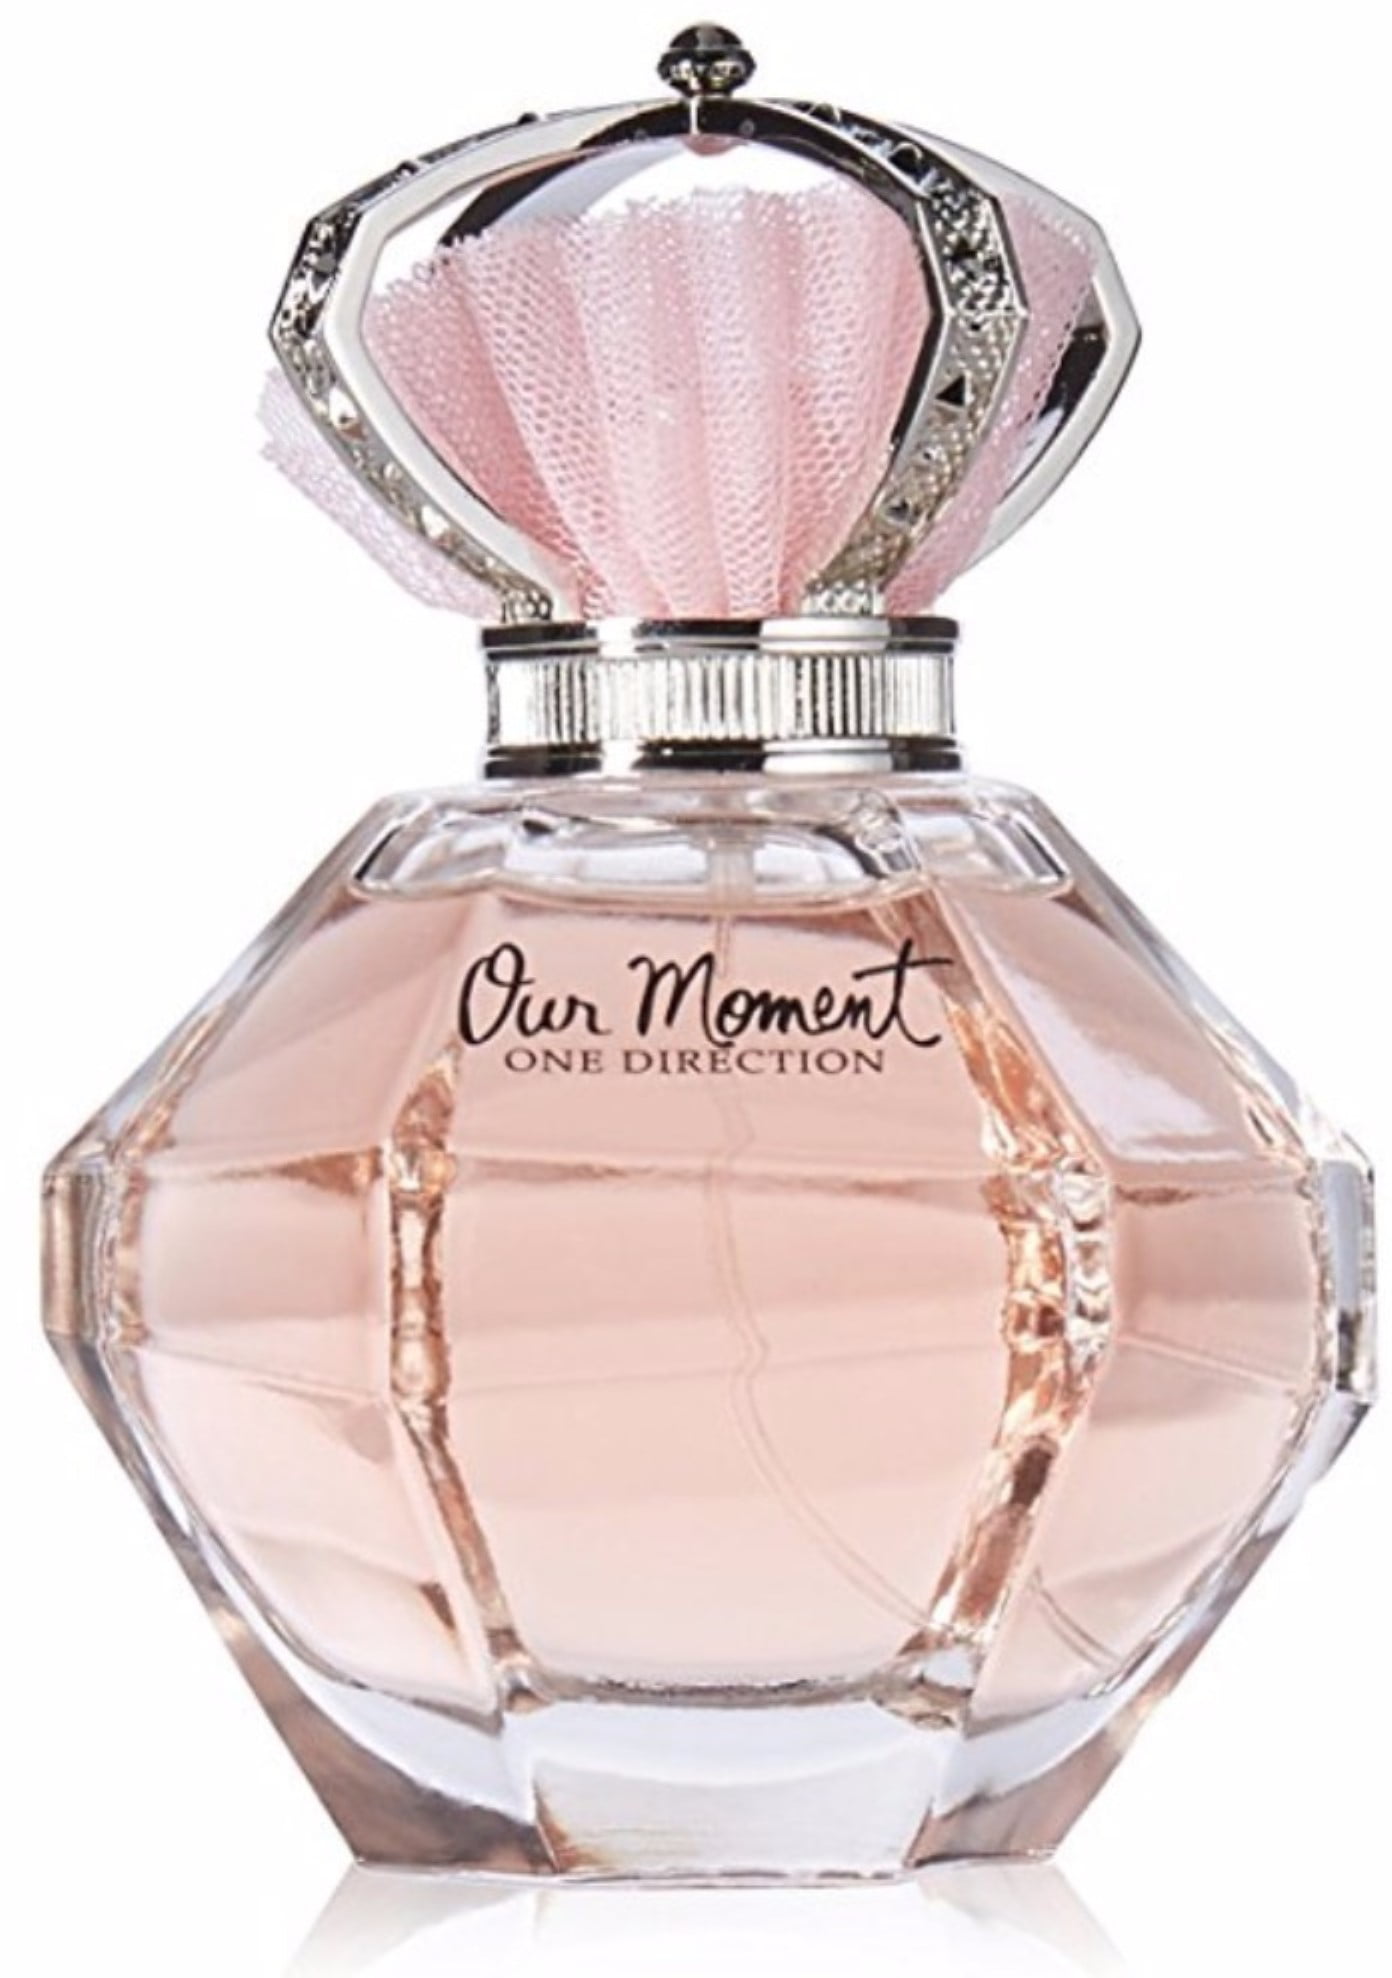 one moment one direction perfume price